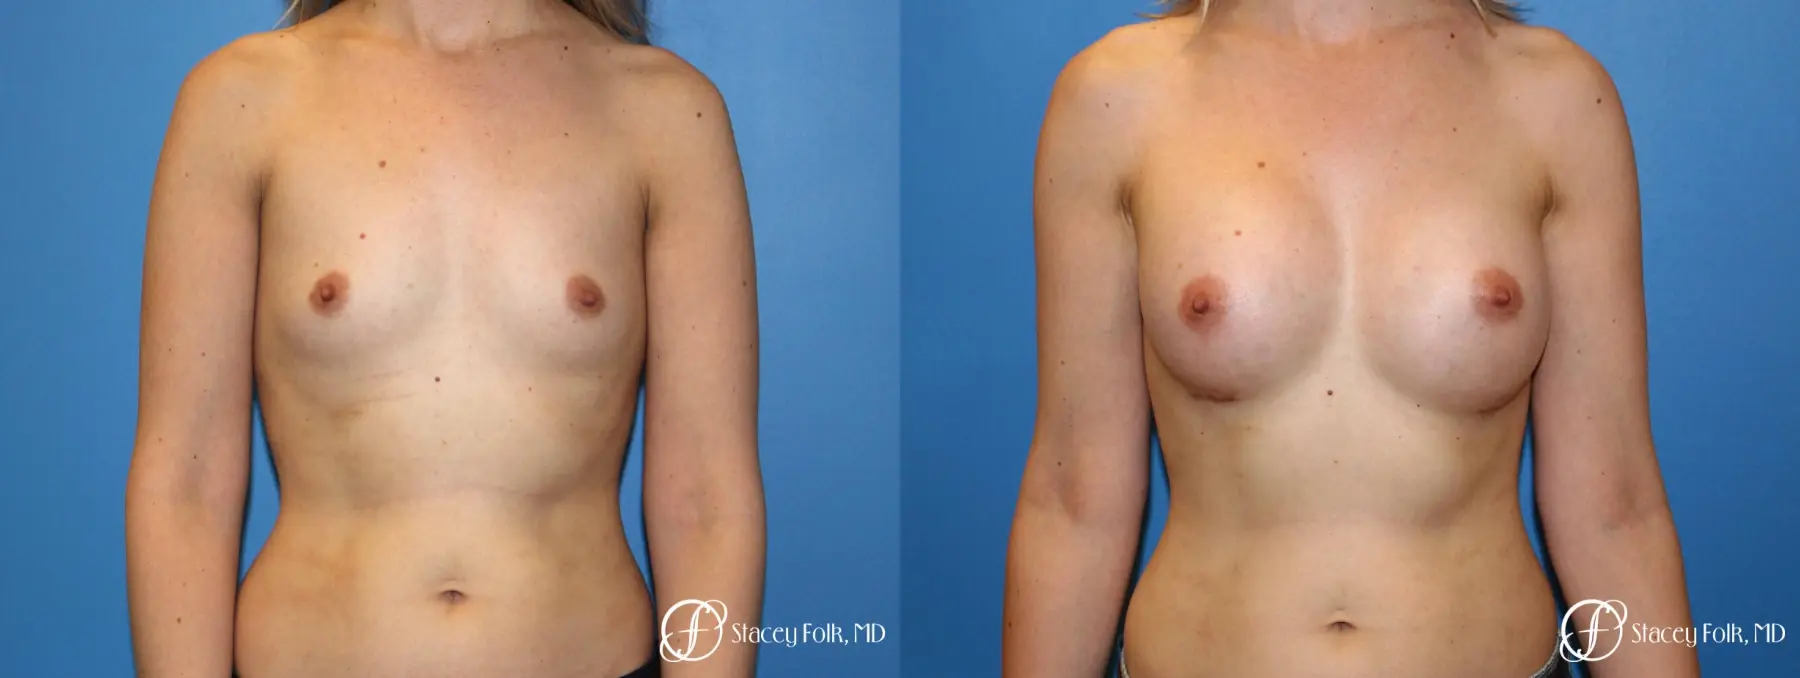 Denver Breast augmentation 7110 - Before and After 1